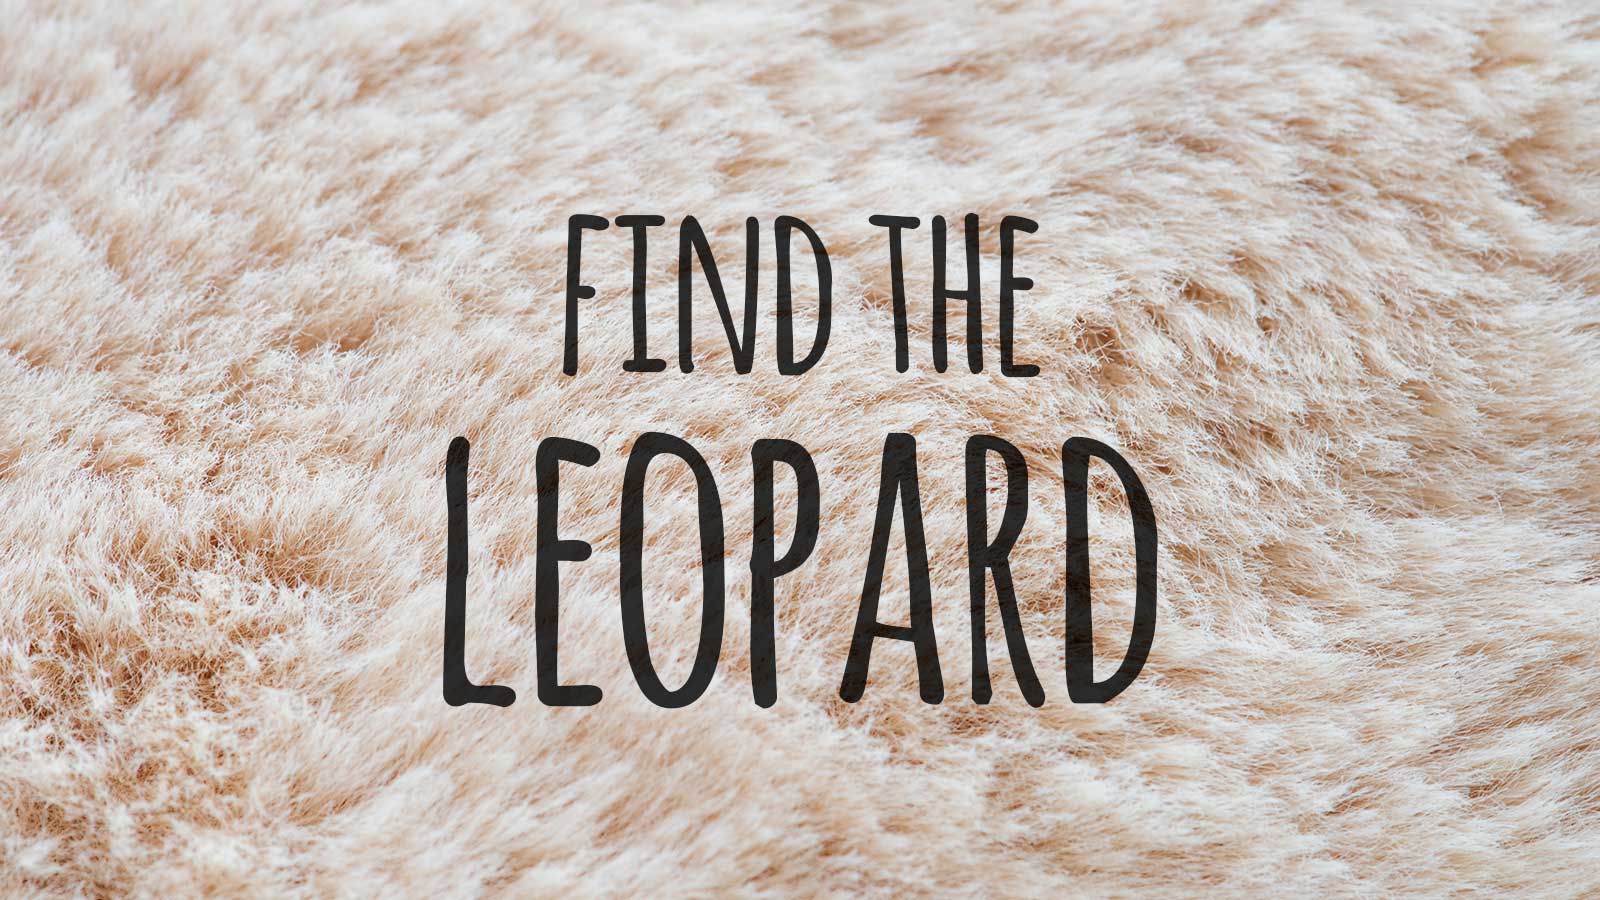 🐹 Hey, We Bet You Can’t Identify at Least 16/21 of These Baby Animals Text Leopard